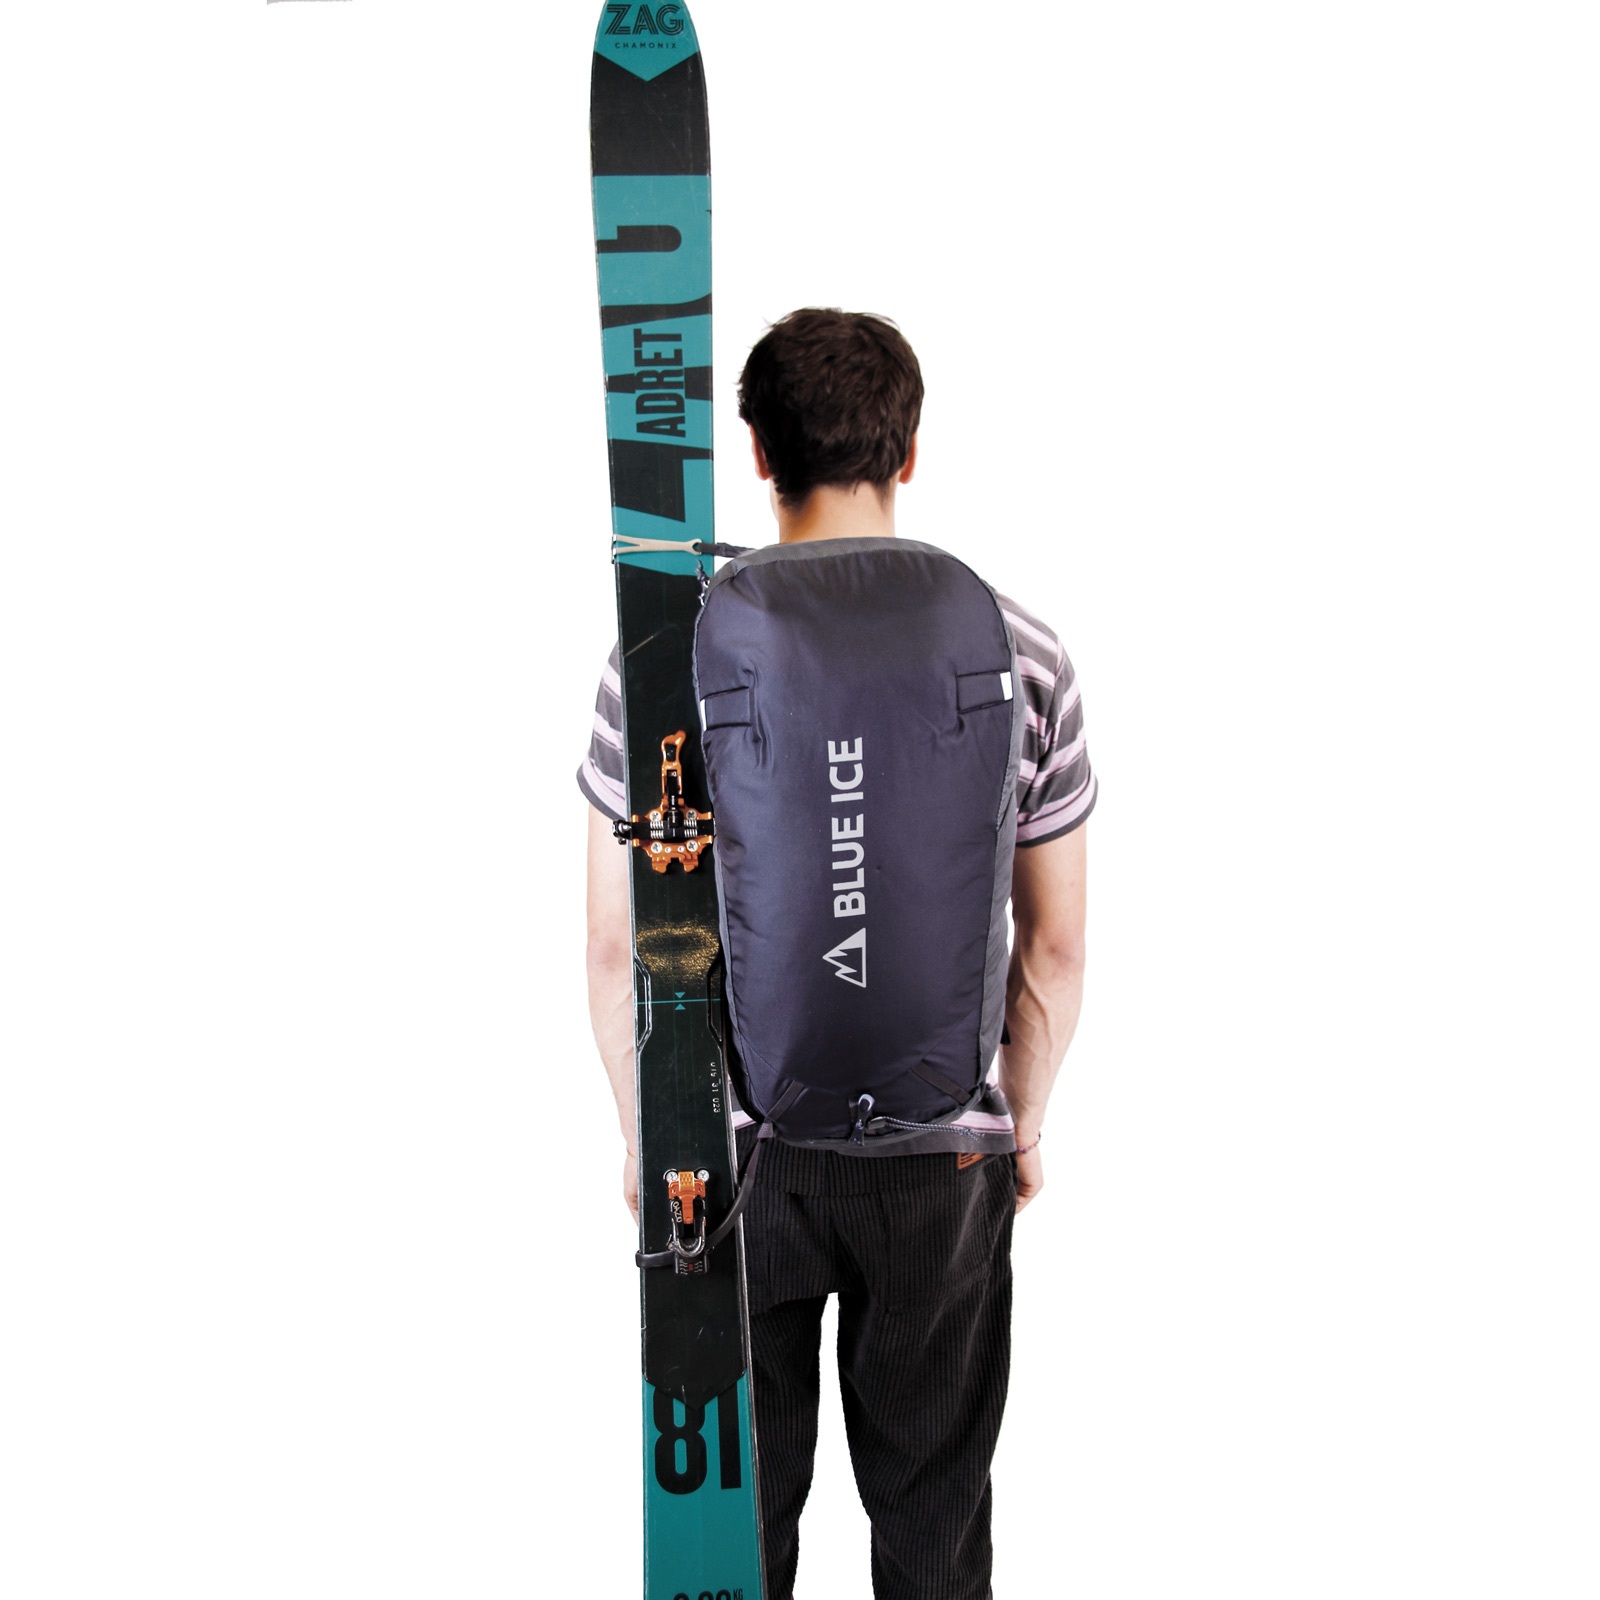 https://content.admin.blueice.com/media/images/products/598791/variants-images/Taka30-indiaink-skis-web-1.jpg